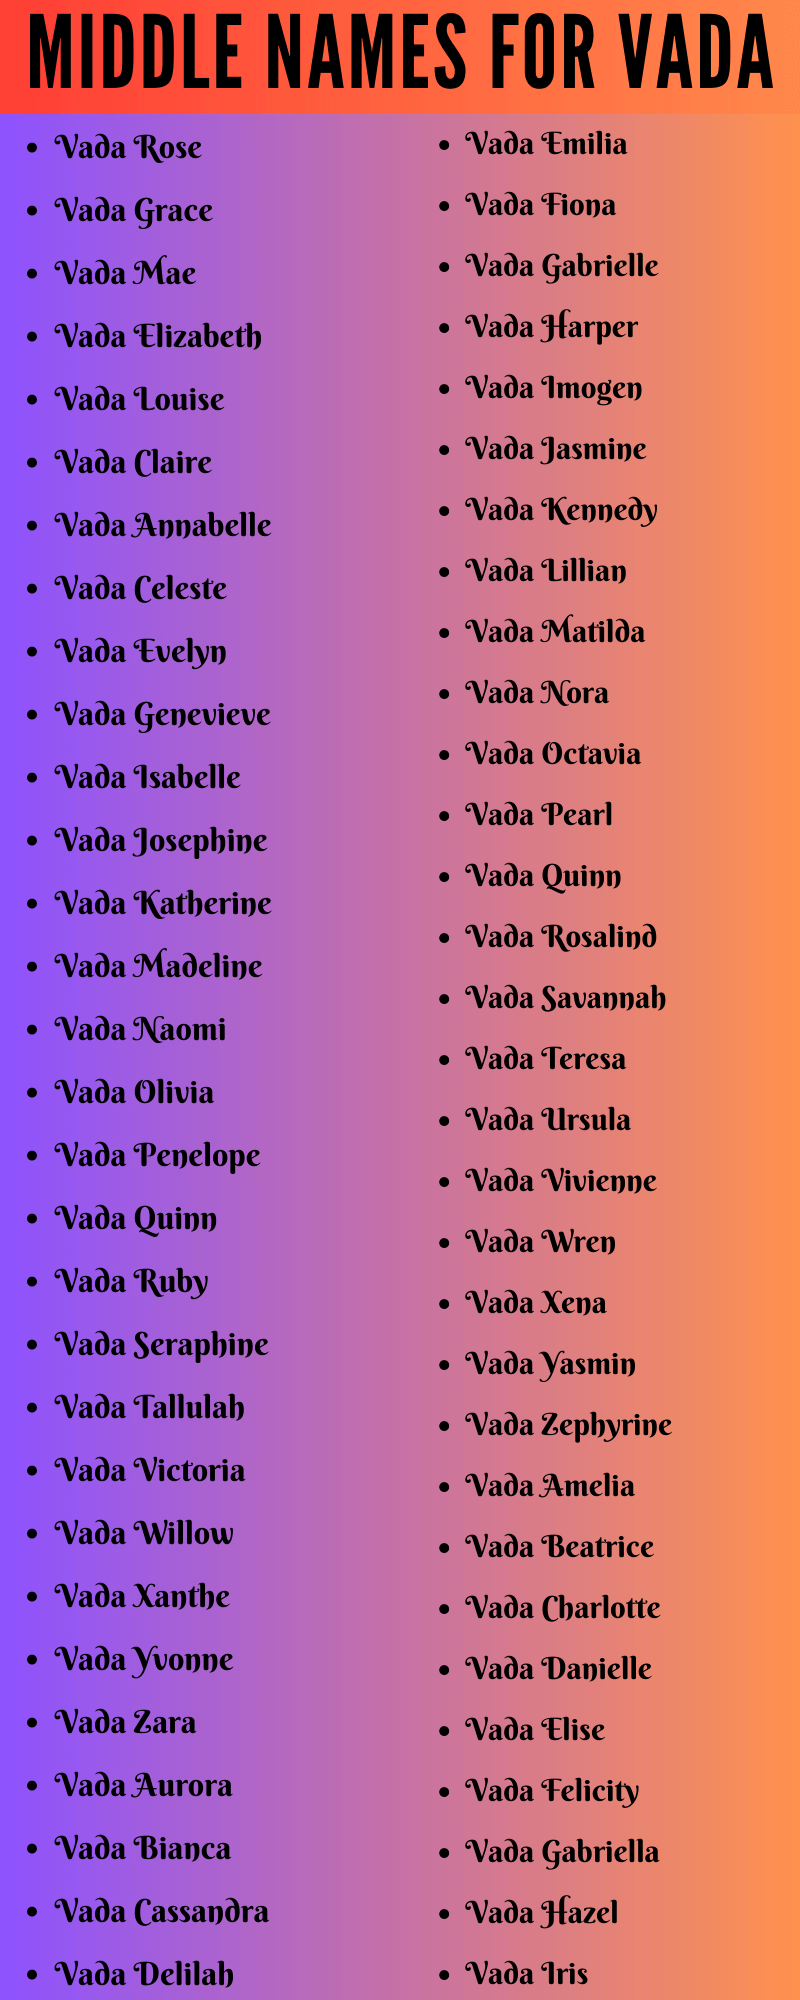 400 Unique Middle Names For Vada